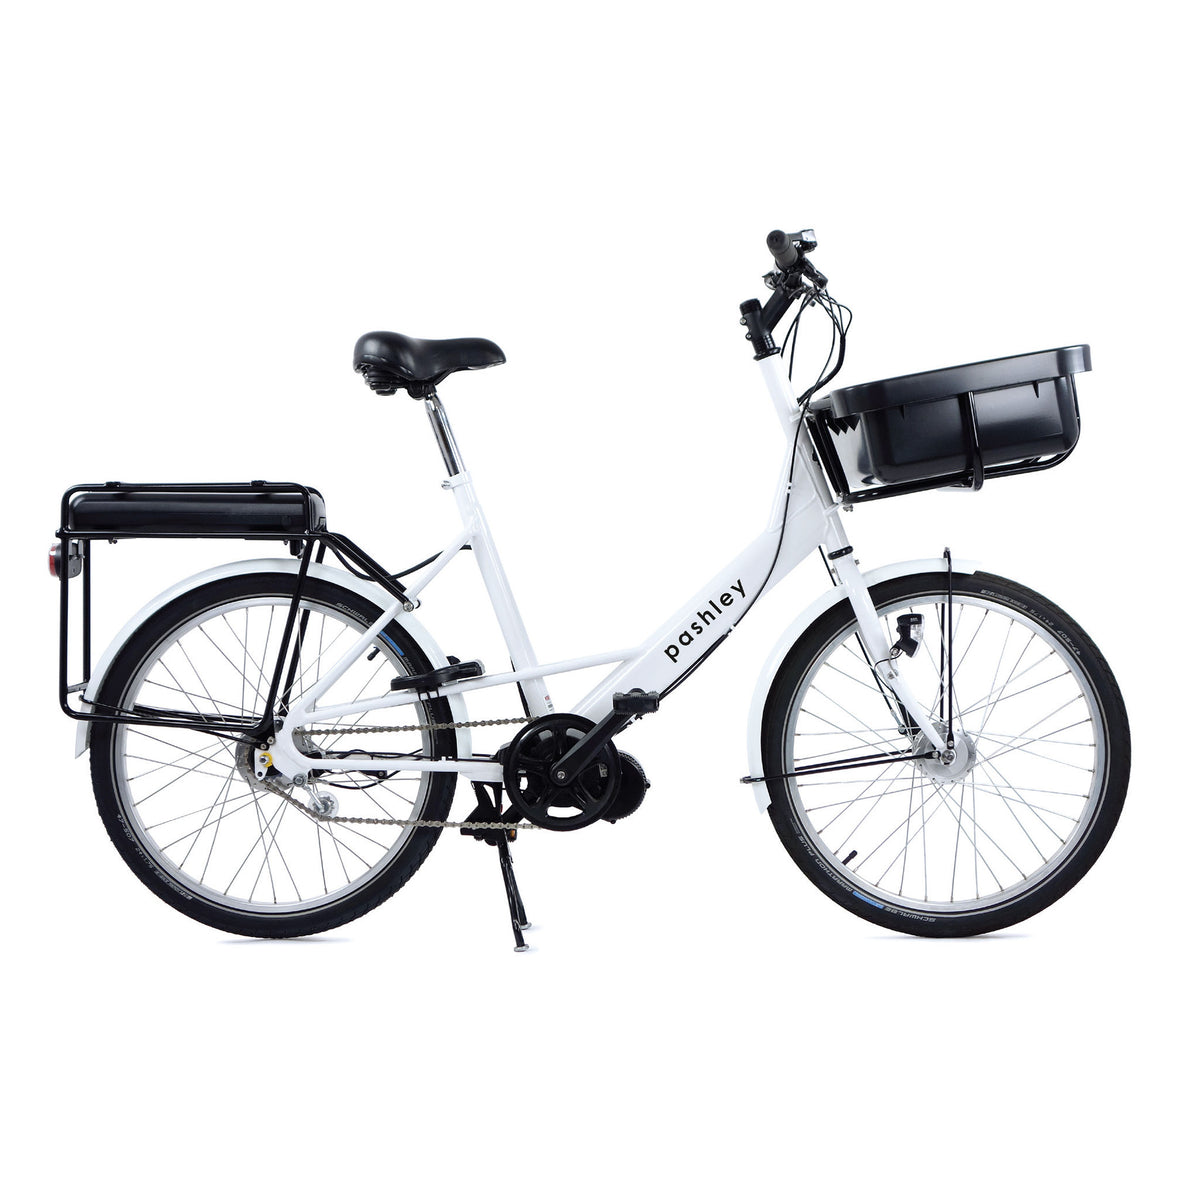 Side view of an electric cargo bike in white with front carry tray and rear rack.